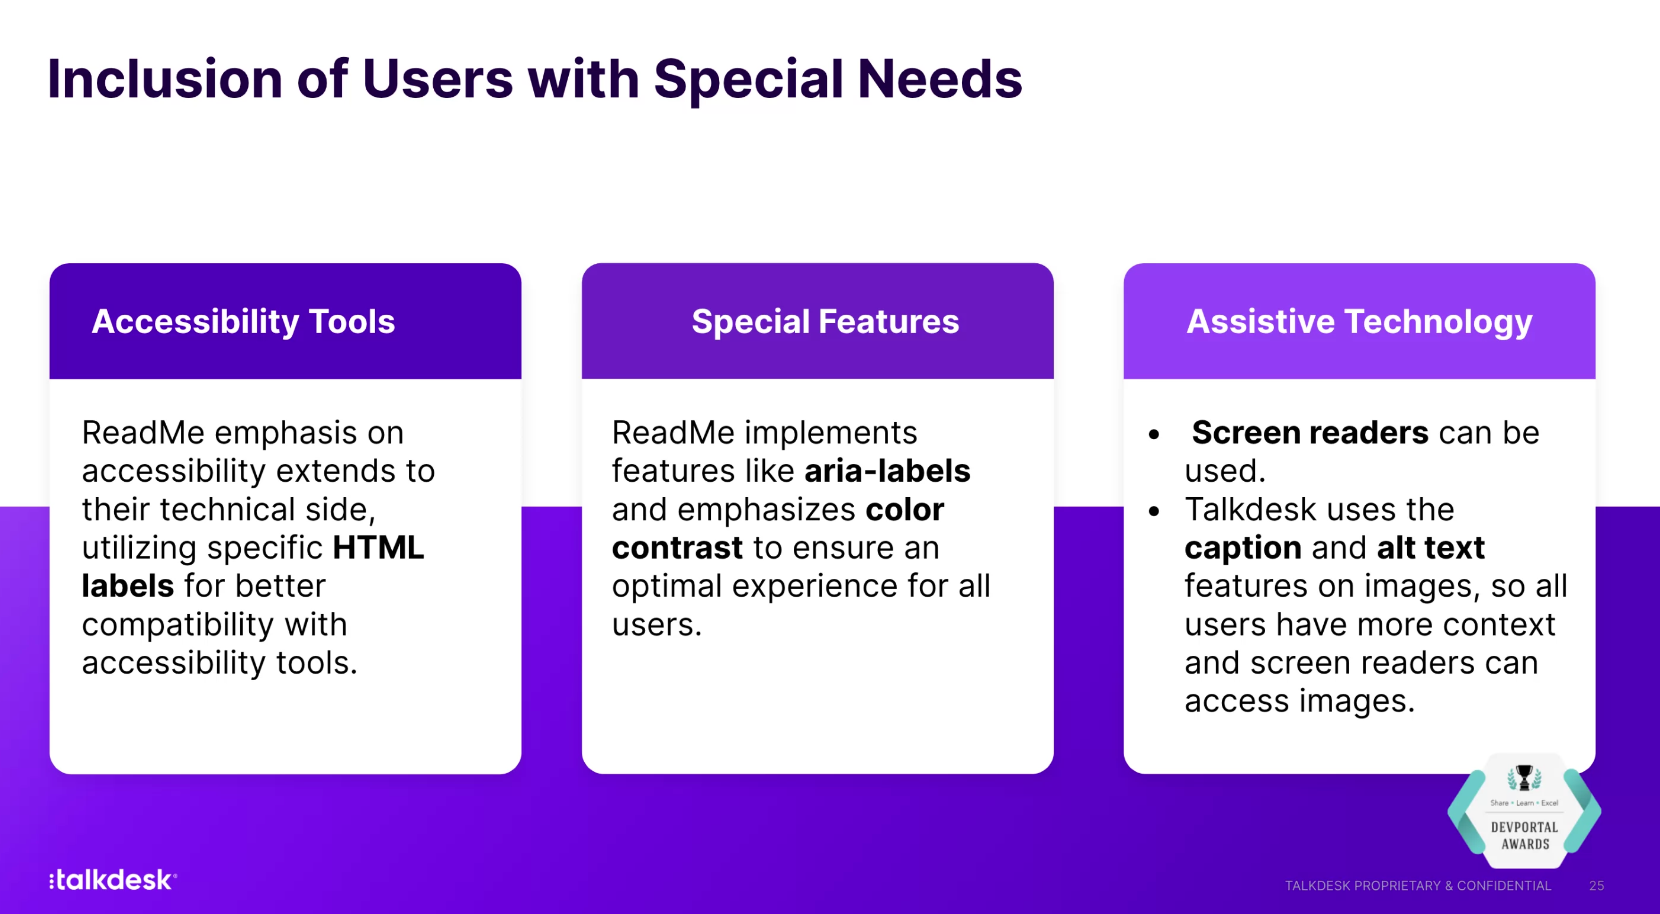 Inclusion of users with special needs: 1. Accessibility tools. 2. Special features. 3. Assistive Technology